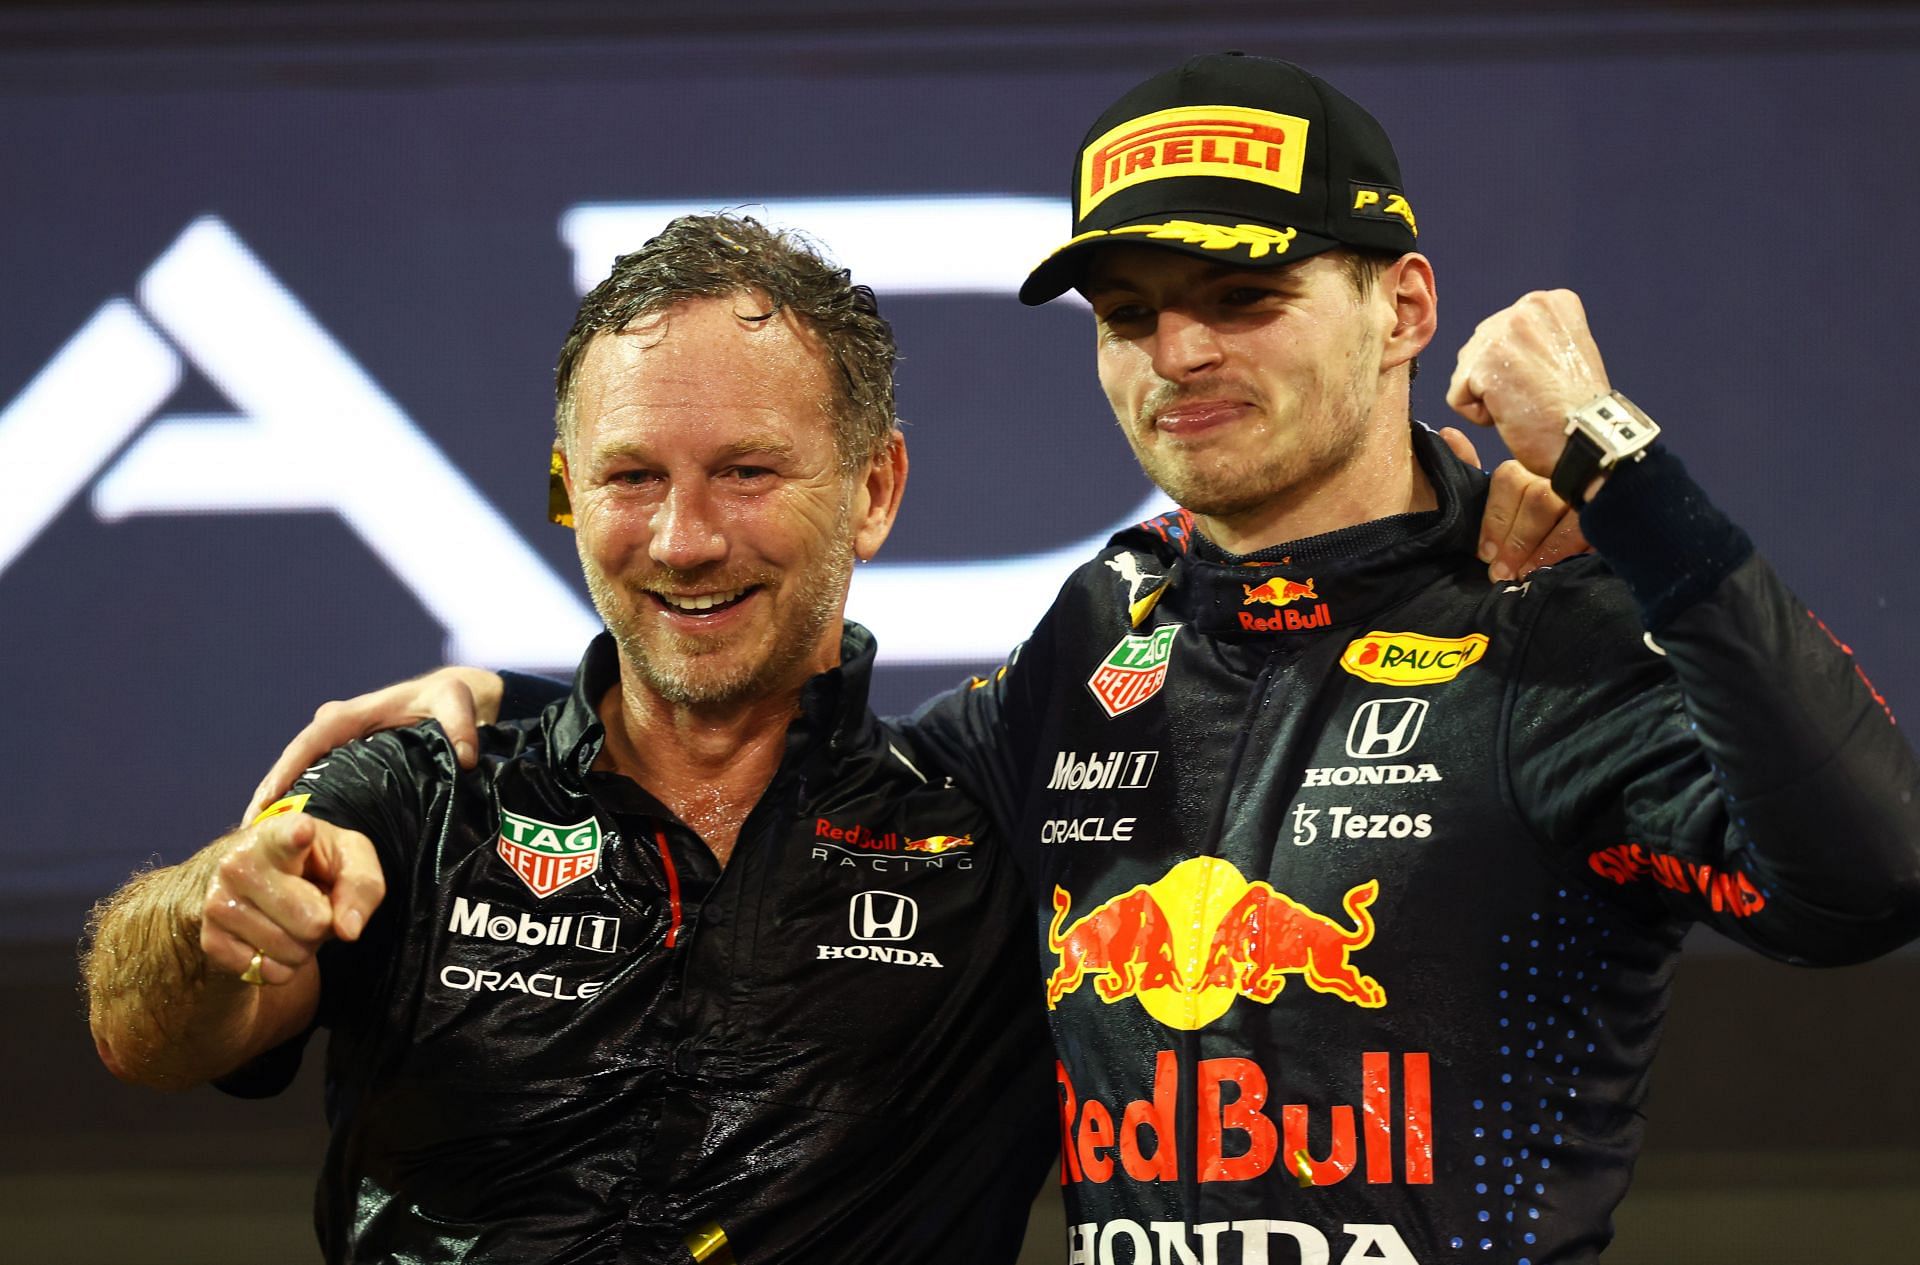 Race winner and 2021 F1 World Drivers Champion Max Verstappen with Red Bull Racing Team Principal Christian Horner on the podium during the 2021 Abu Dhabi Grand Prix. (Photo by Bryn Lennon/Getty Images)